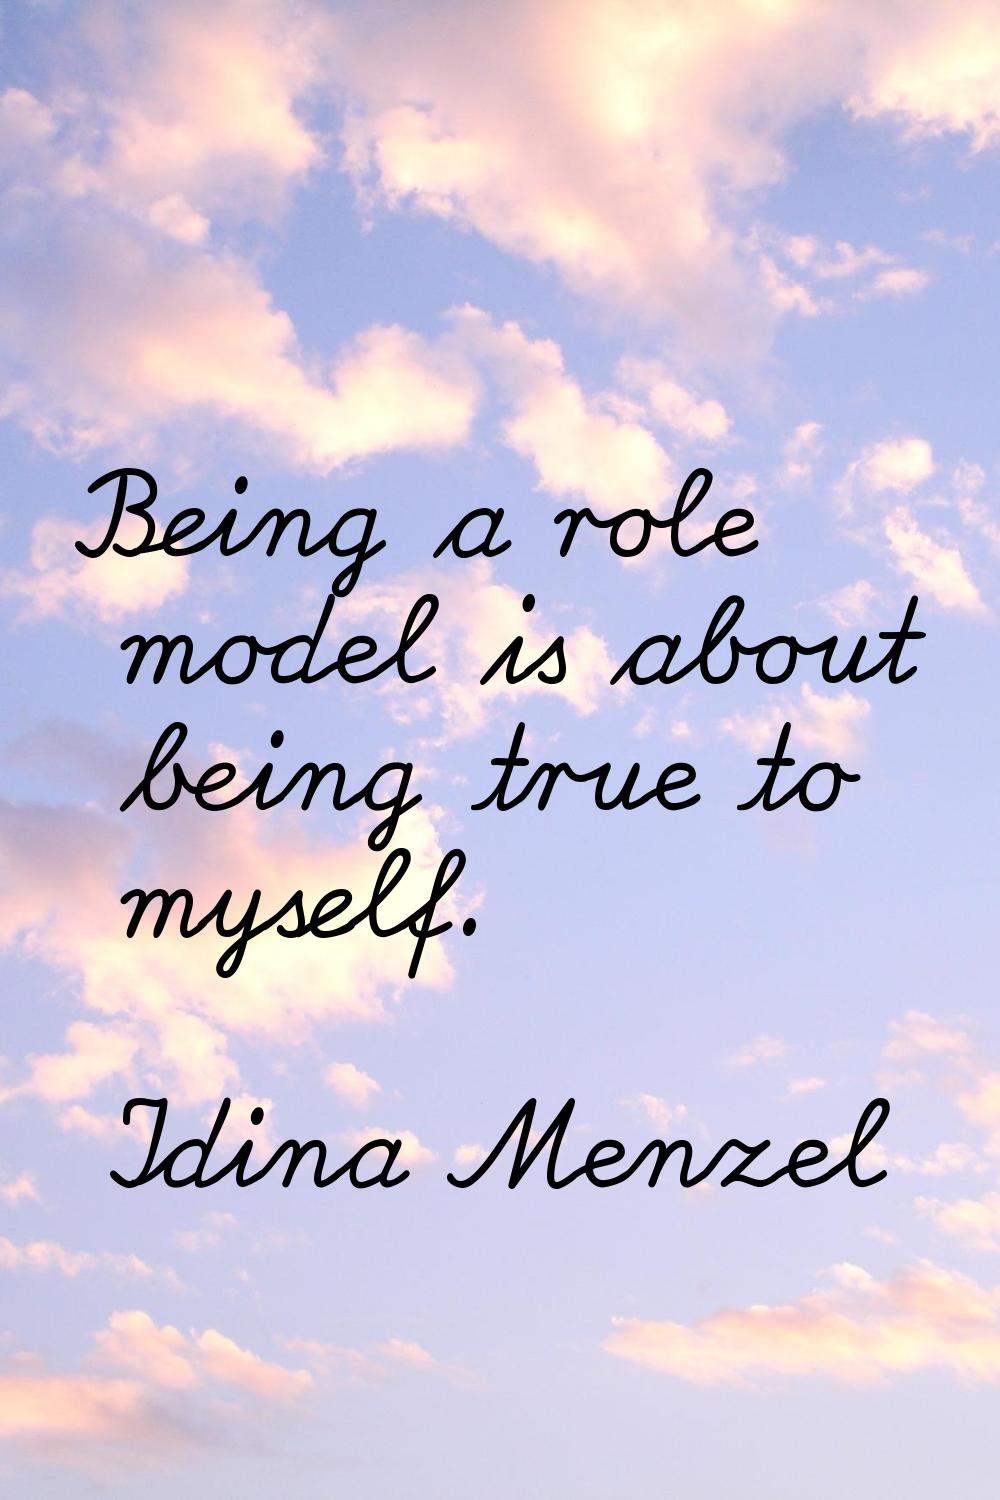 Being a role model is about being true to myself.